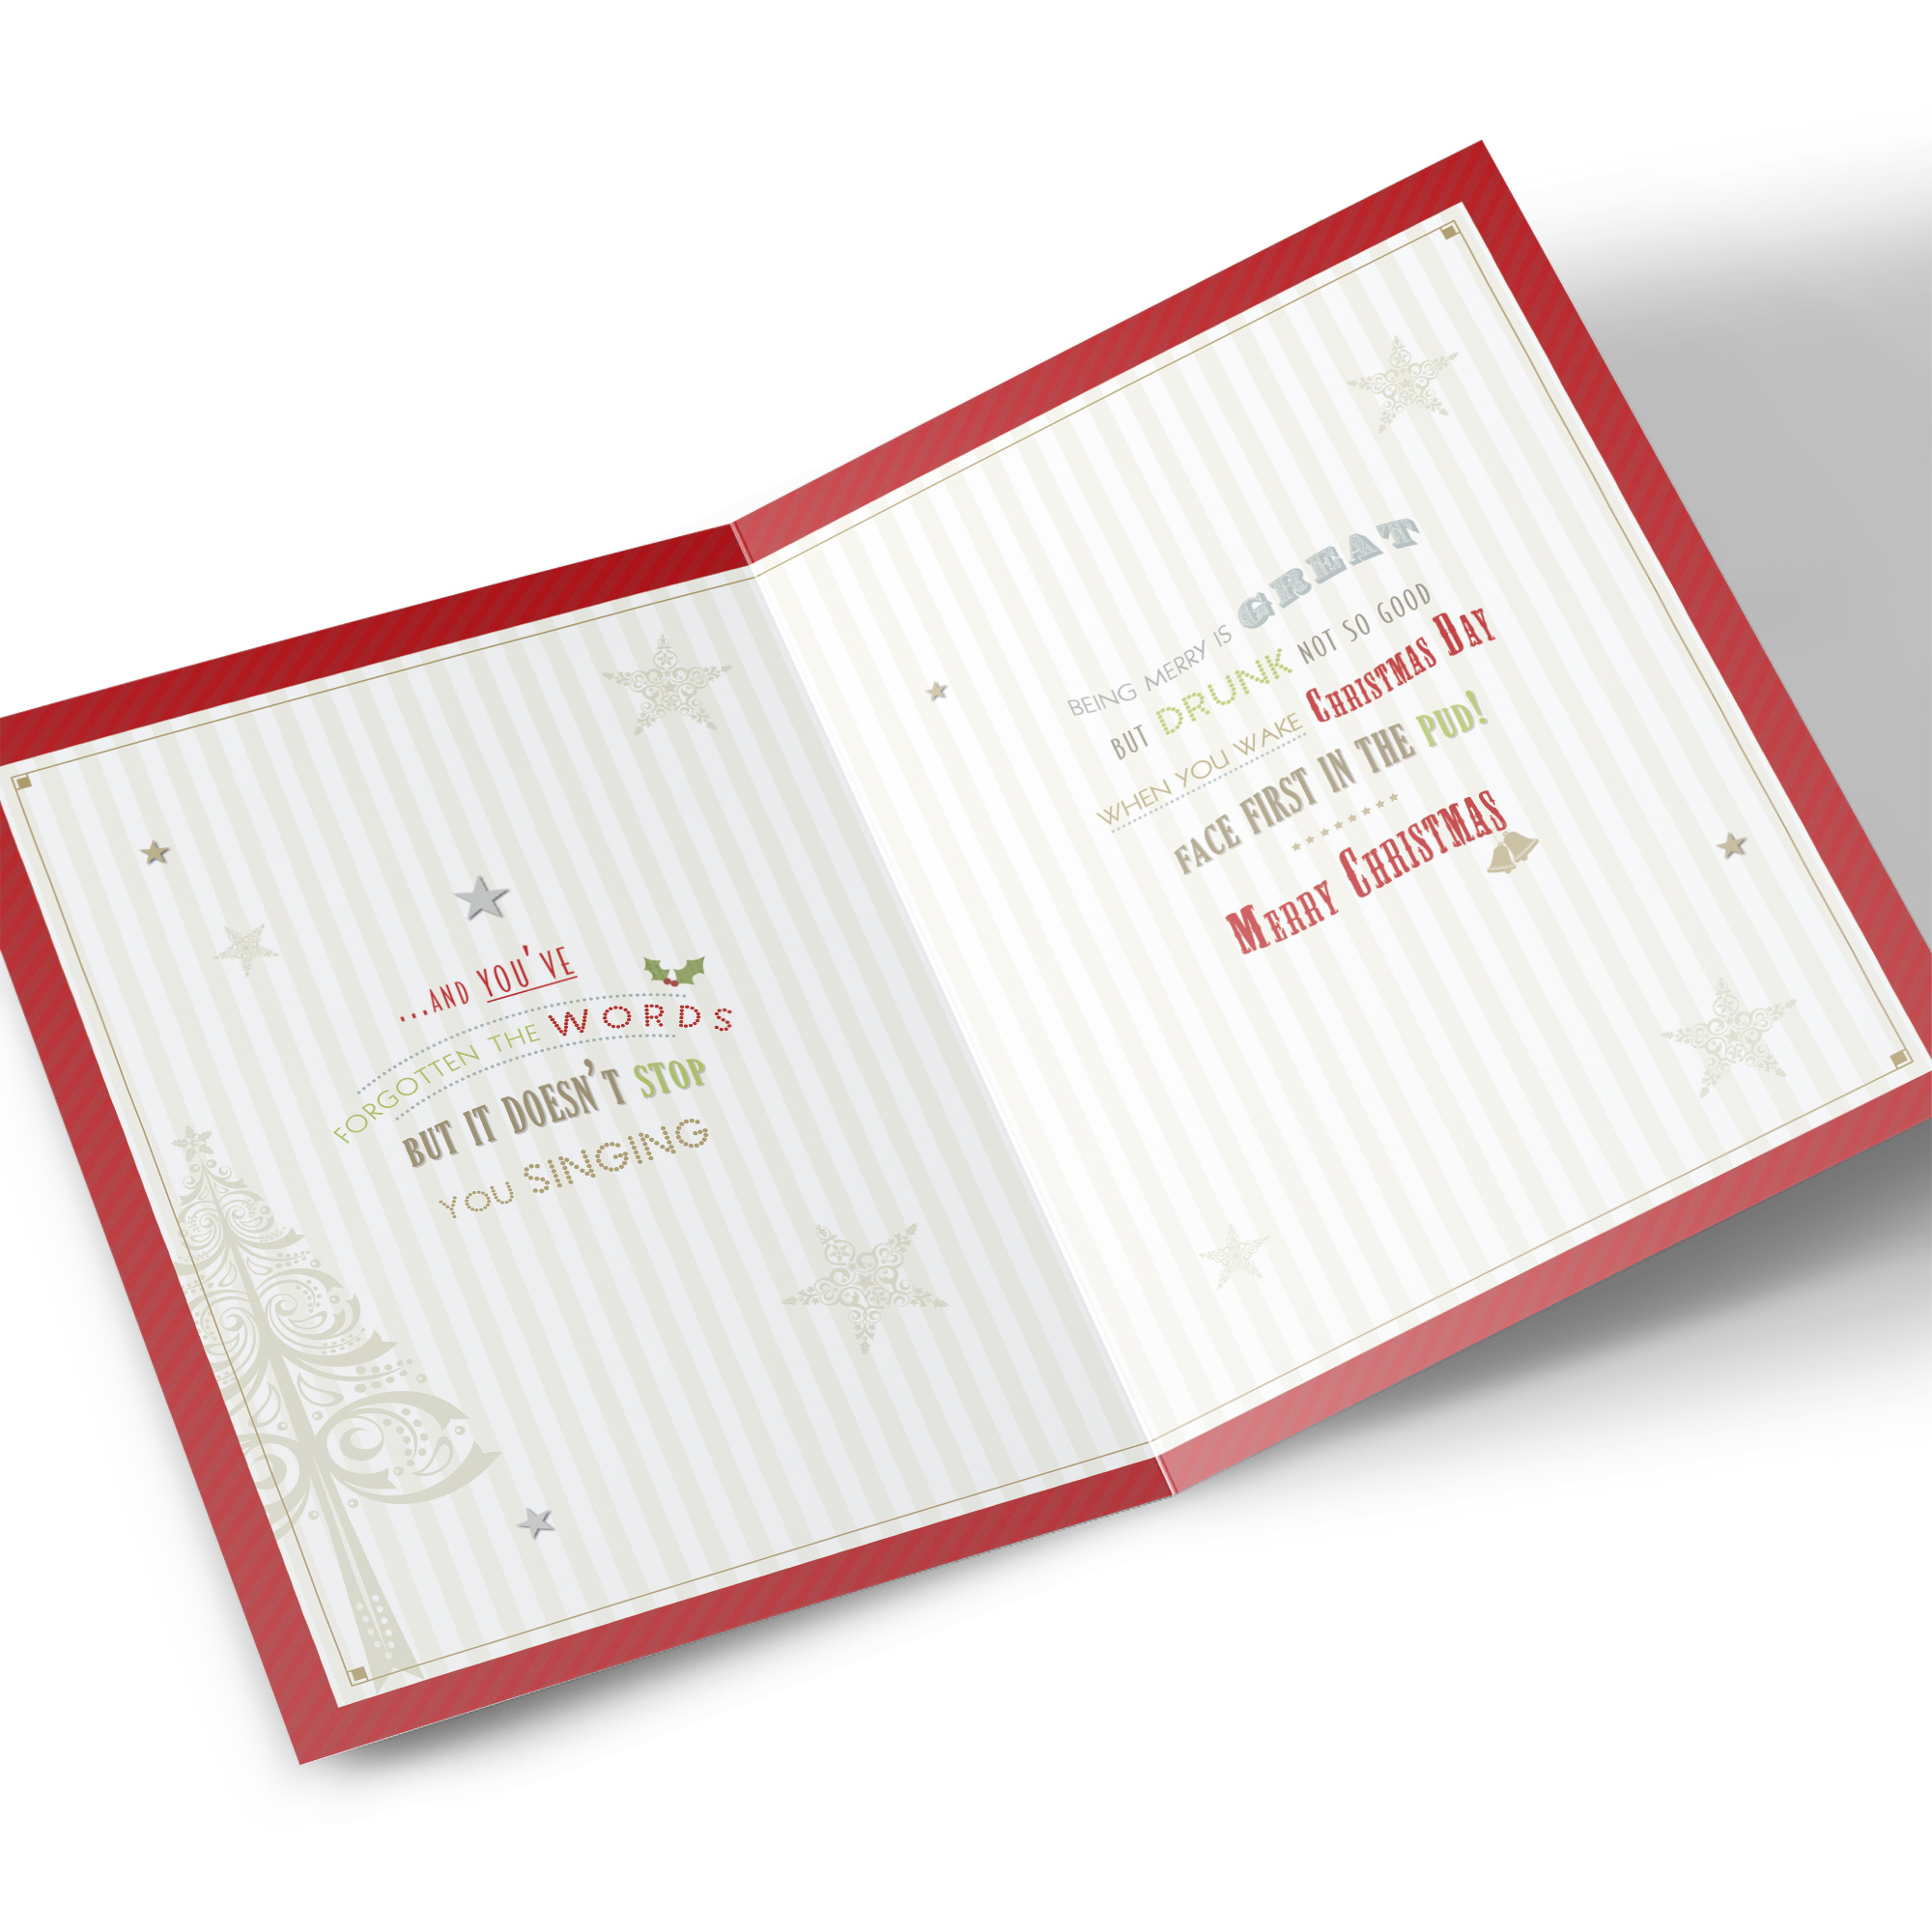 Personalised Christmas Card - Eat, Drink And Be Merry